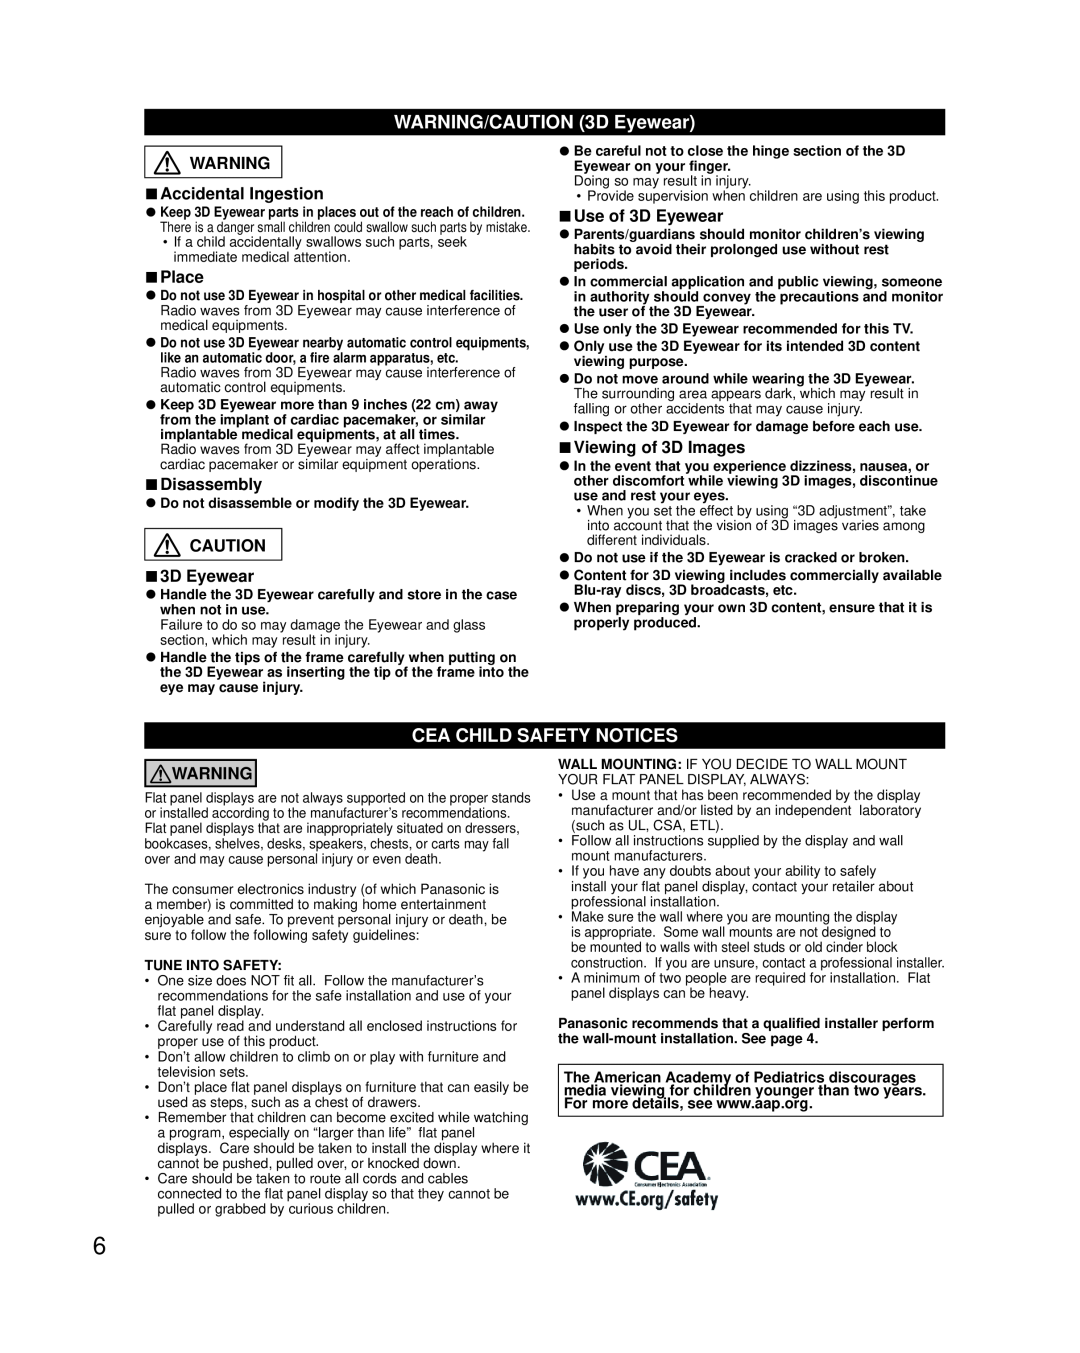 Panasonic TC-P55VT50 WARNING/CAUTION 3D Eyewear, Cea Child Safety Notices, Accidental Ingestion, Place, Disassembly 